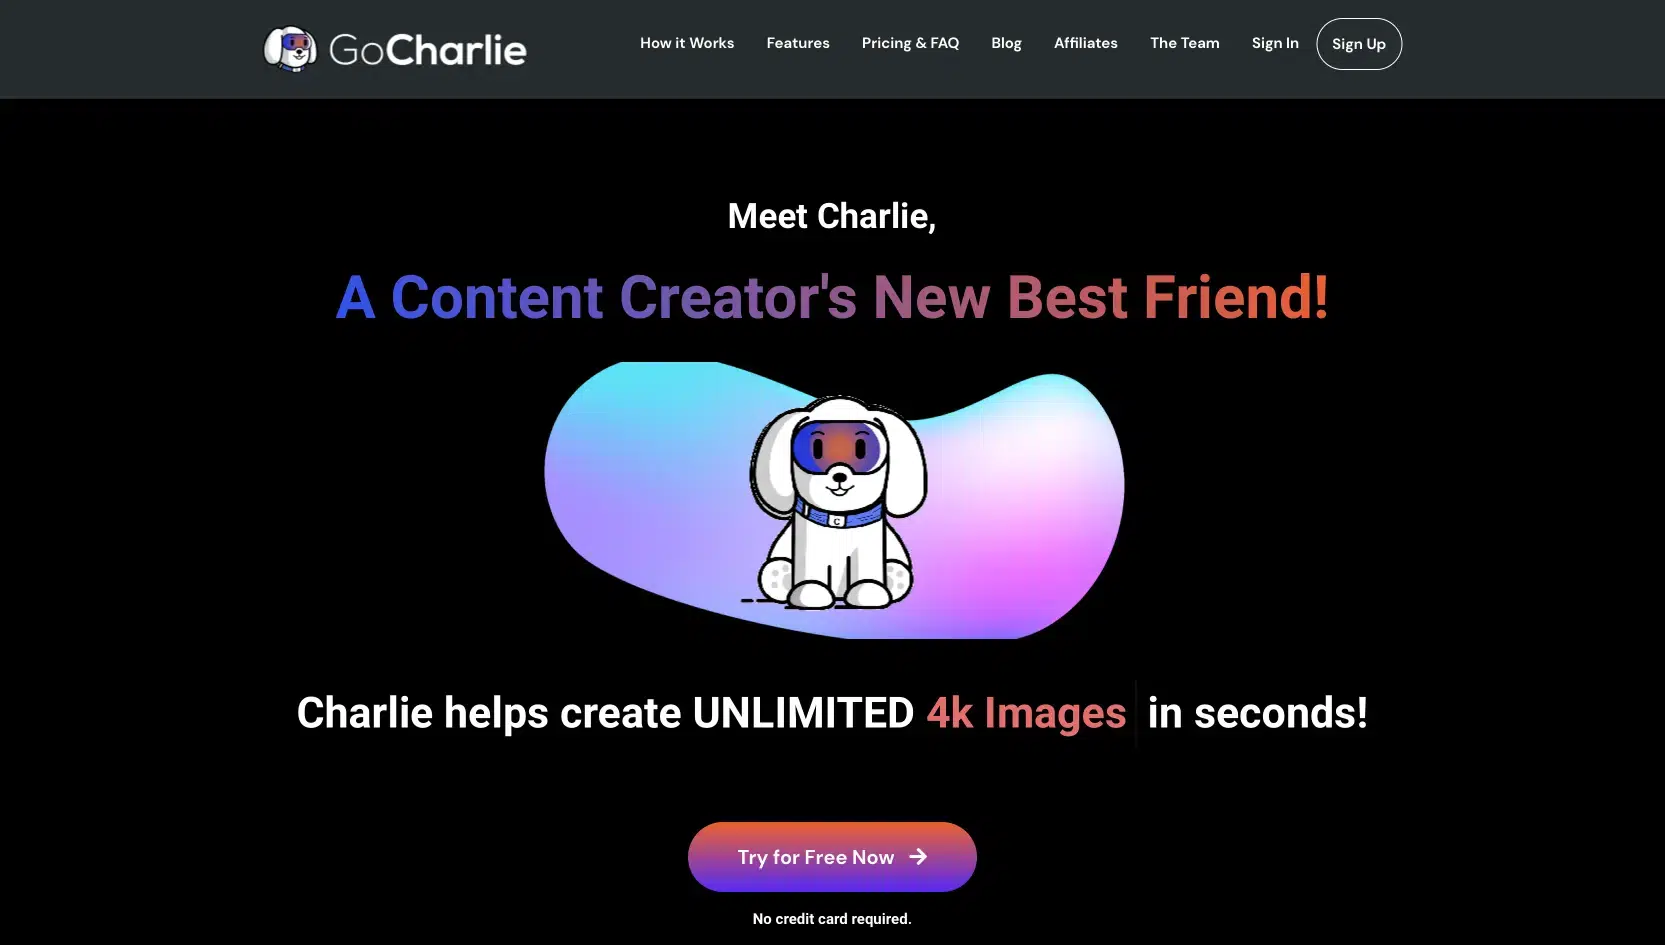 Go Charliewebsite picture